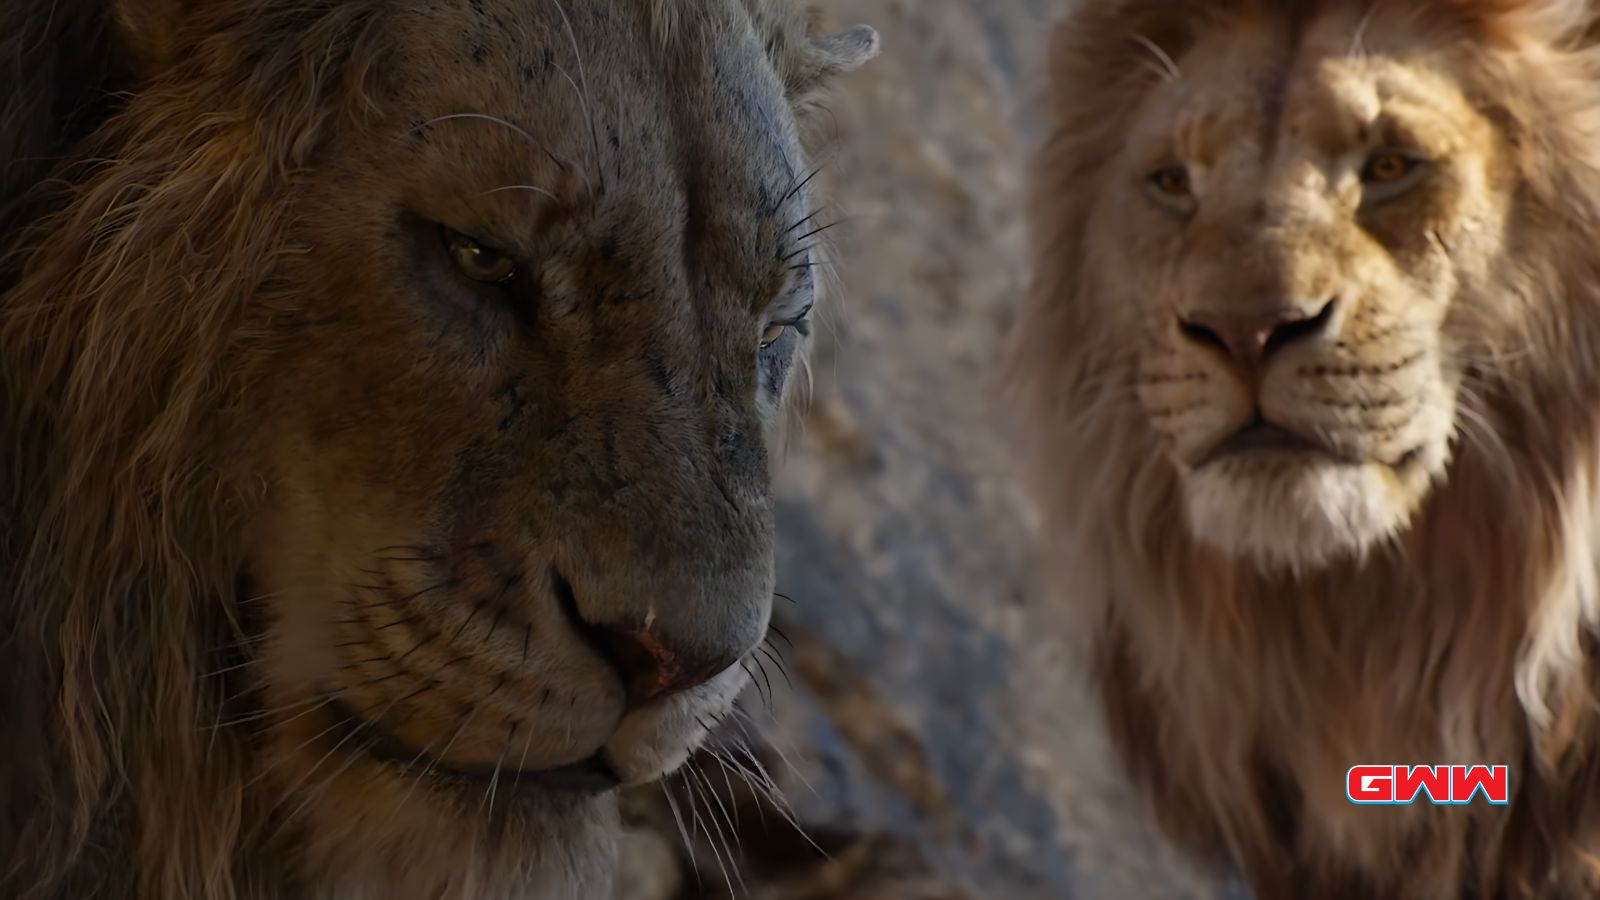 Mufasa and Scar talking to each other why Scar didn't attend Simba's presentation